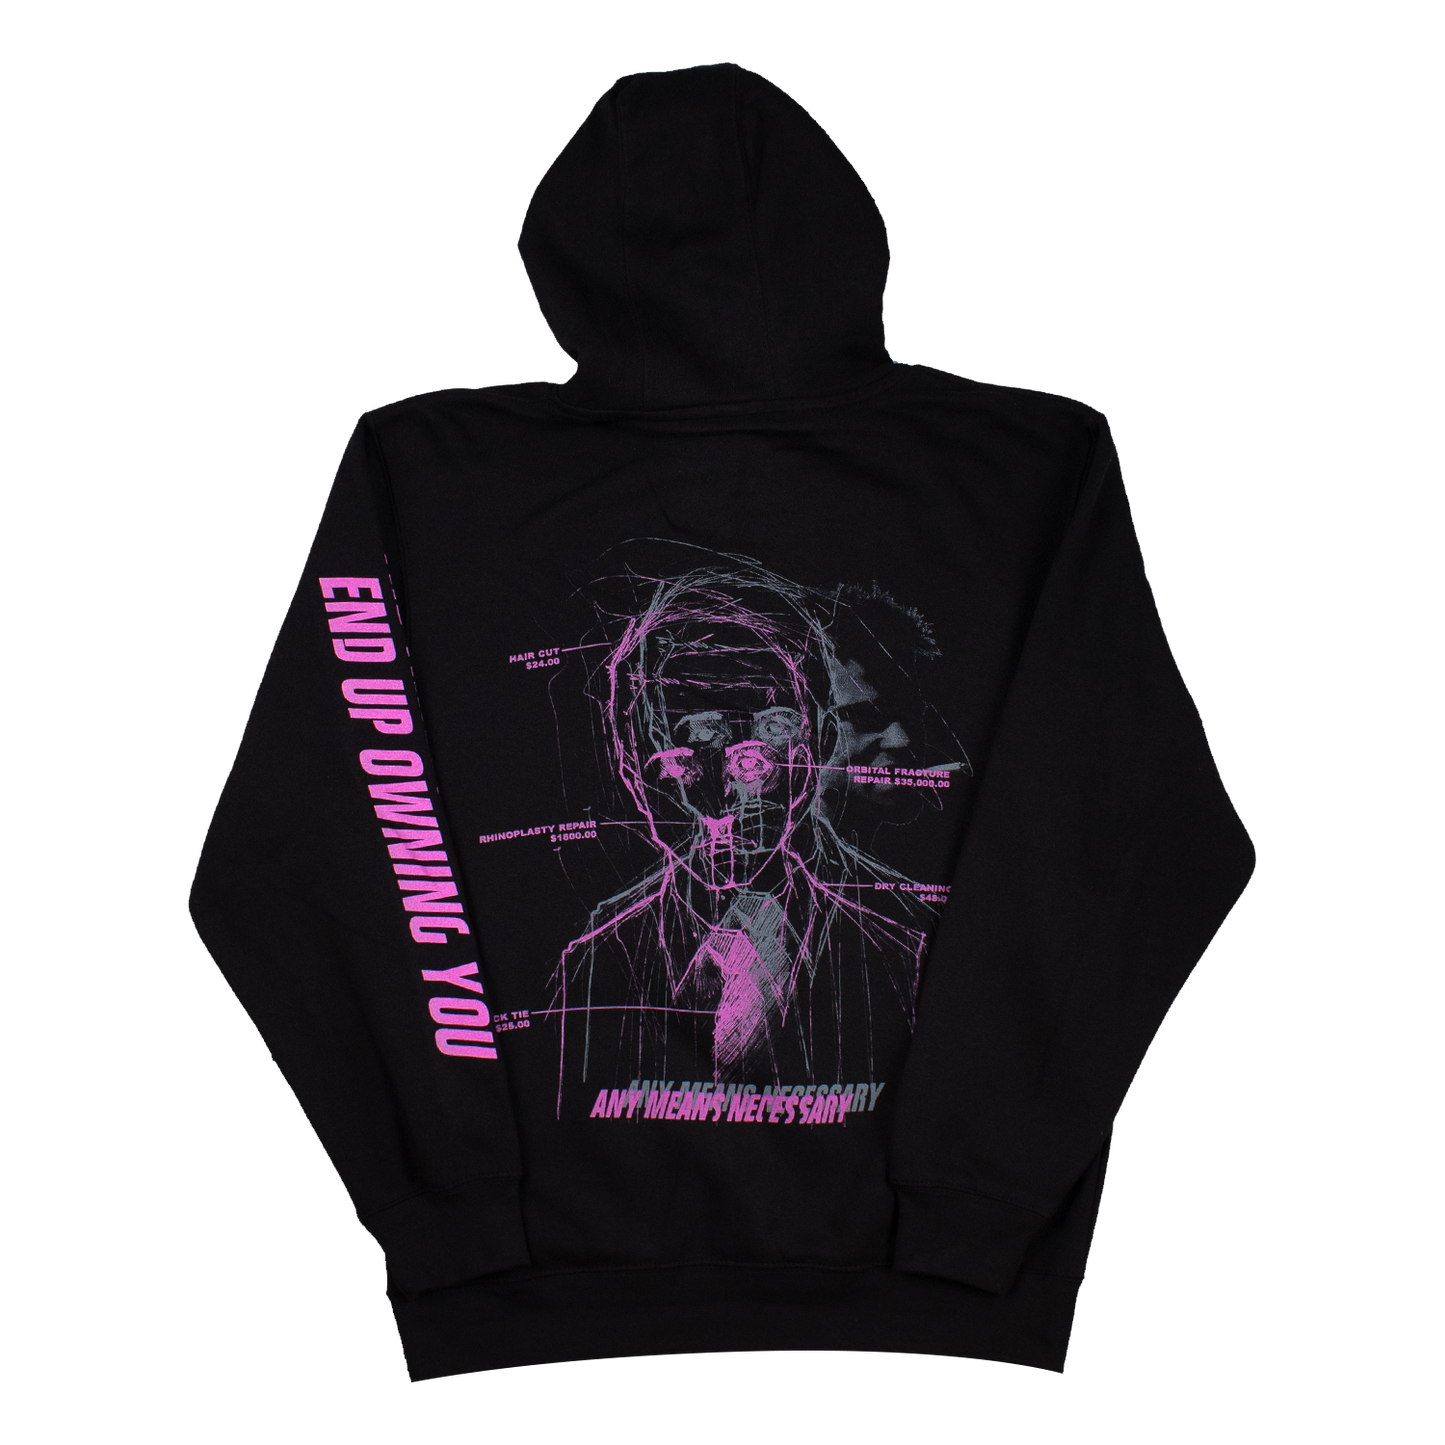 any means necessary shawn coss fight club pullover hoodie black back